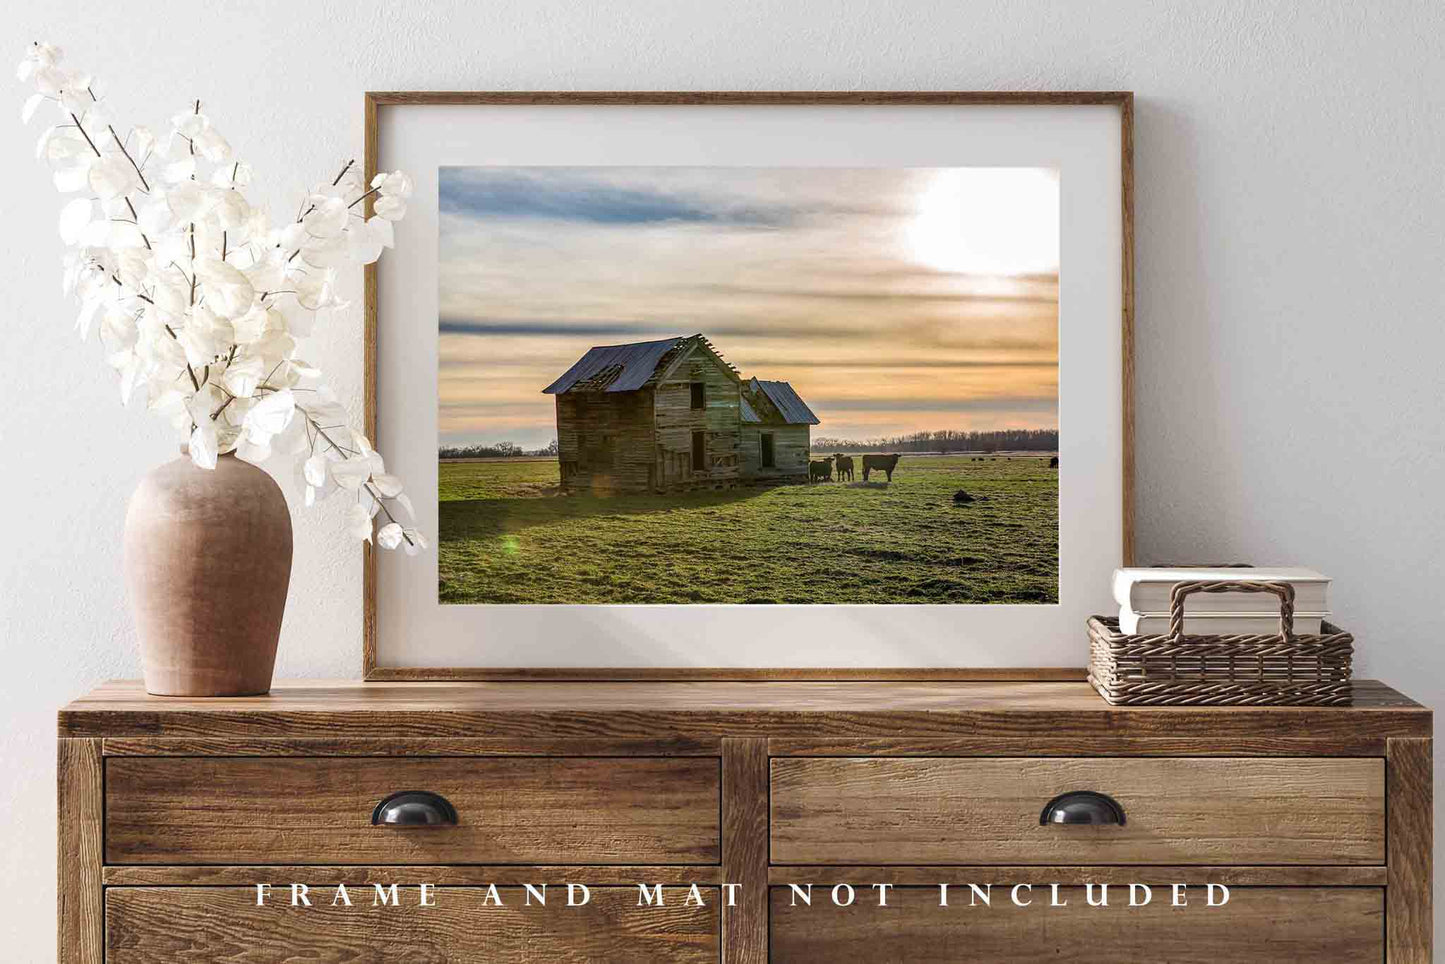 Country Photography Wall Art Print - Picture of Abandoned House in Field Guarded by Angus Cows in Oklahoma Rural Farm Decor 4x6 to 40x60